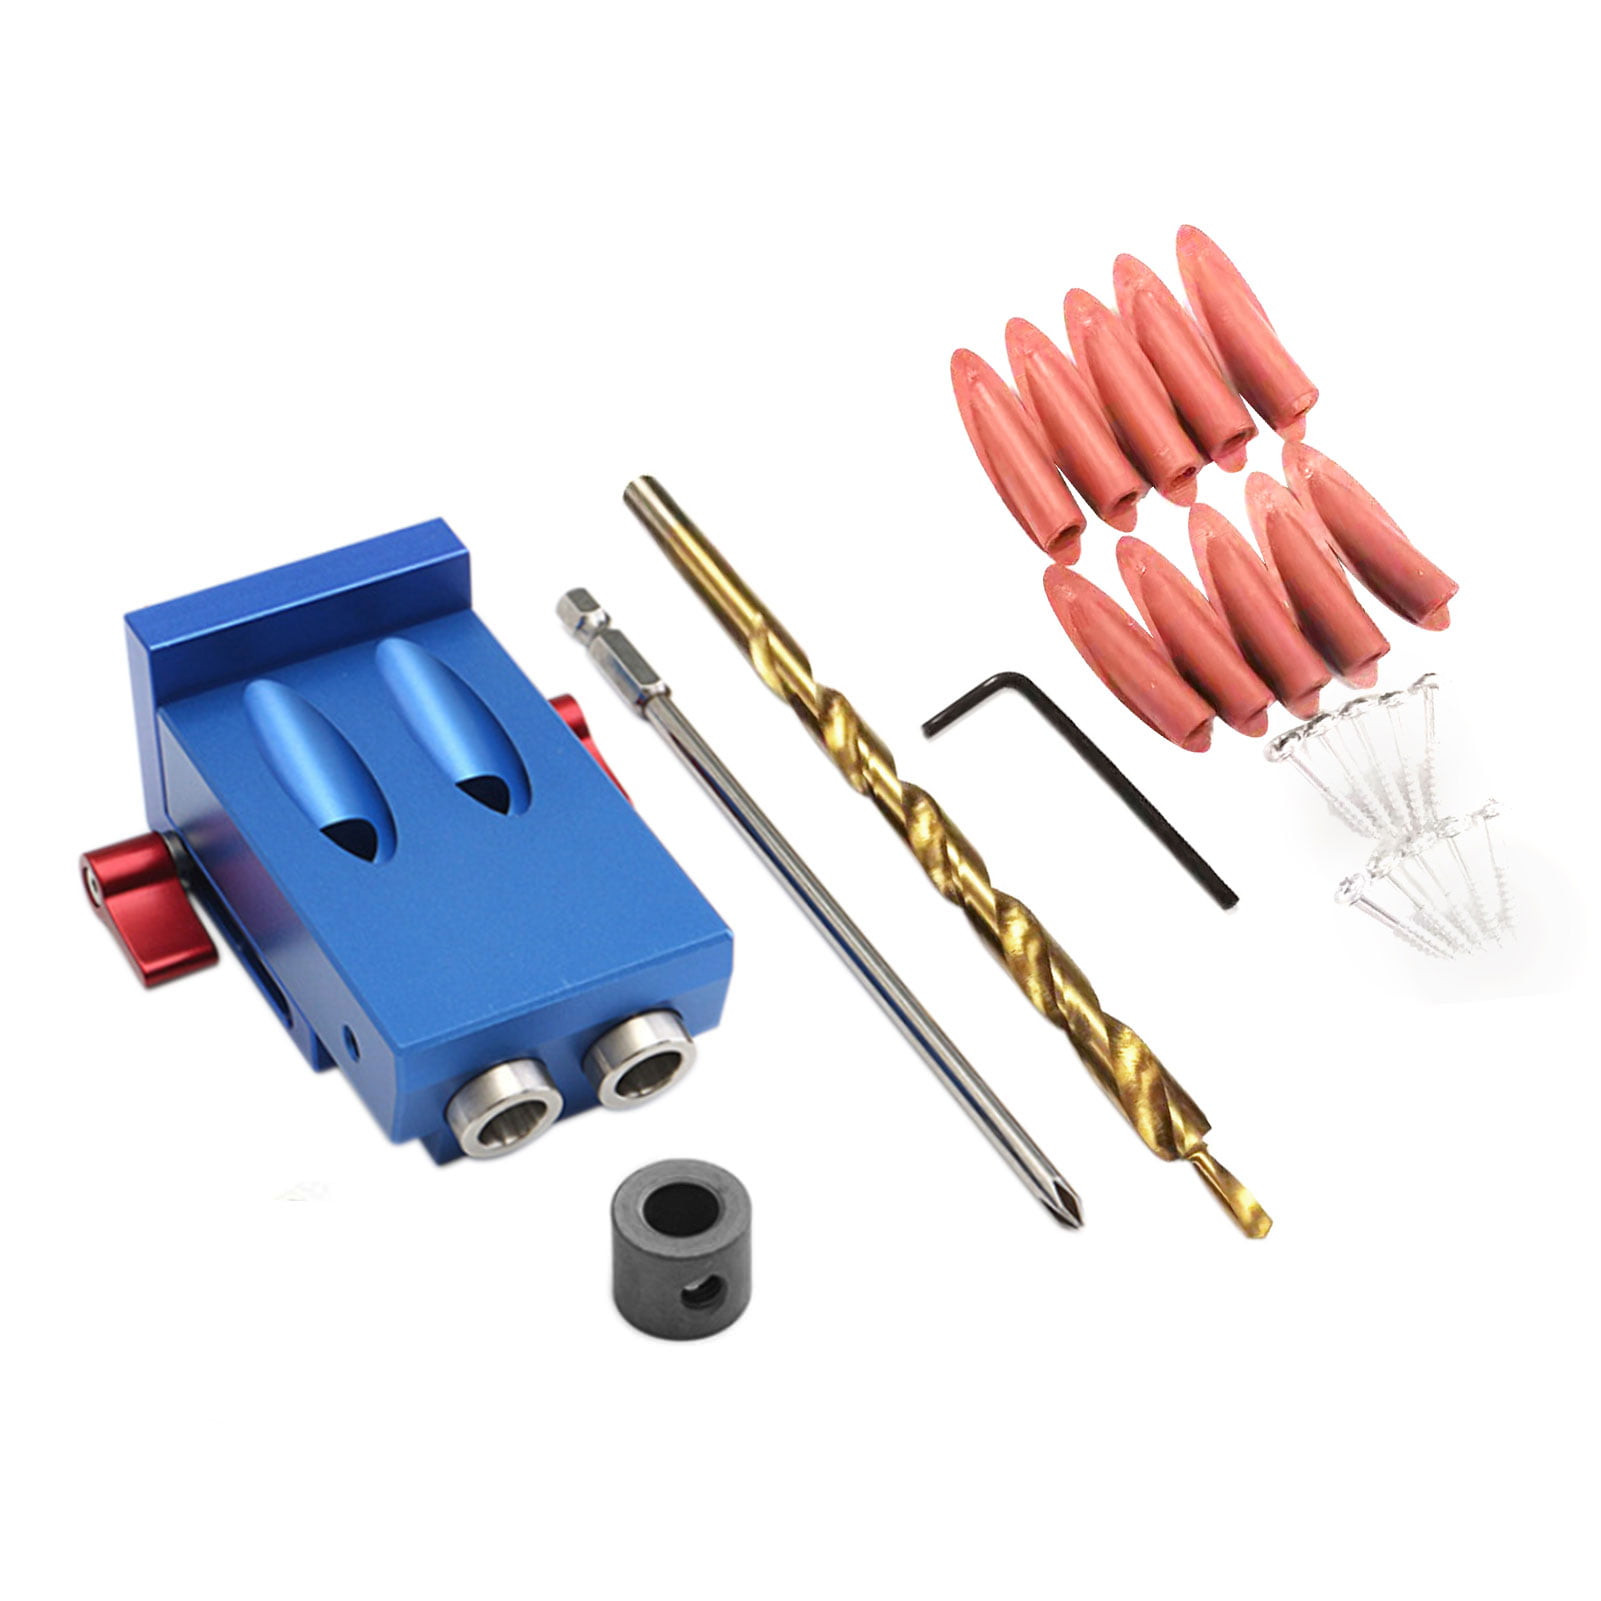 Color : E 7PCS FYYONG 14/15pcs/set Mini Pocket Hole Jig Kit System Joinery Step Drill Bit Accessories Wood Work Tool Set for Woodworking Dropshipping 